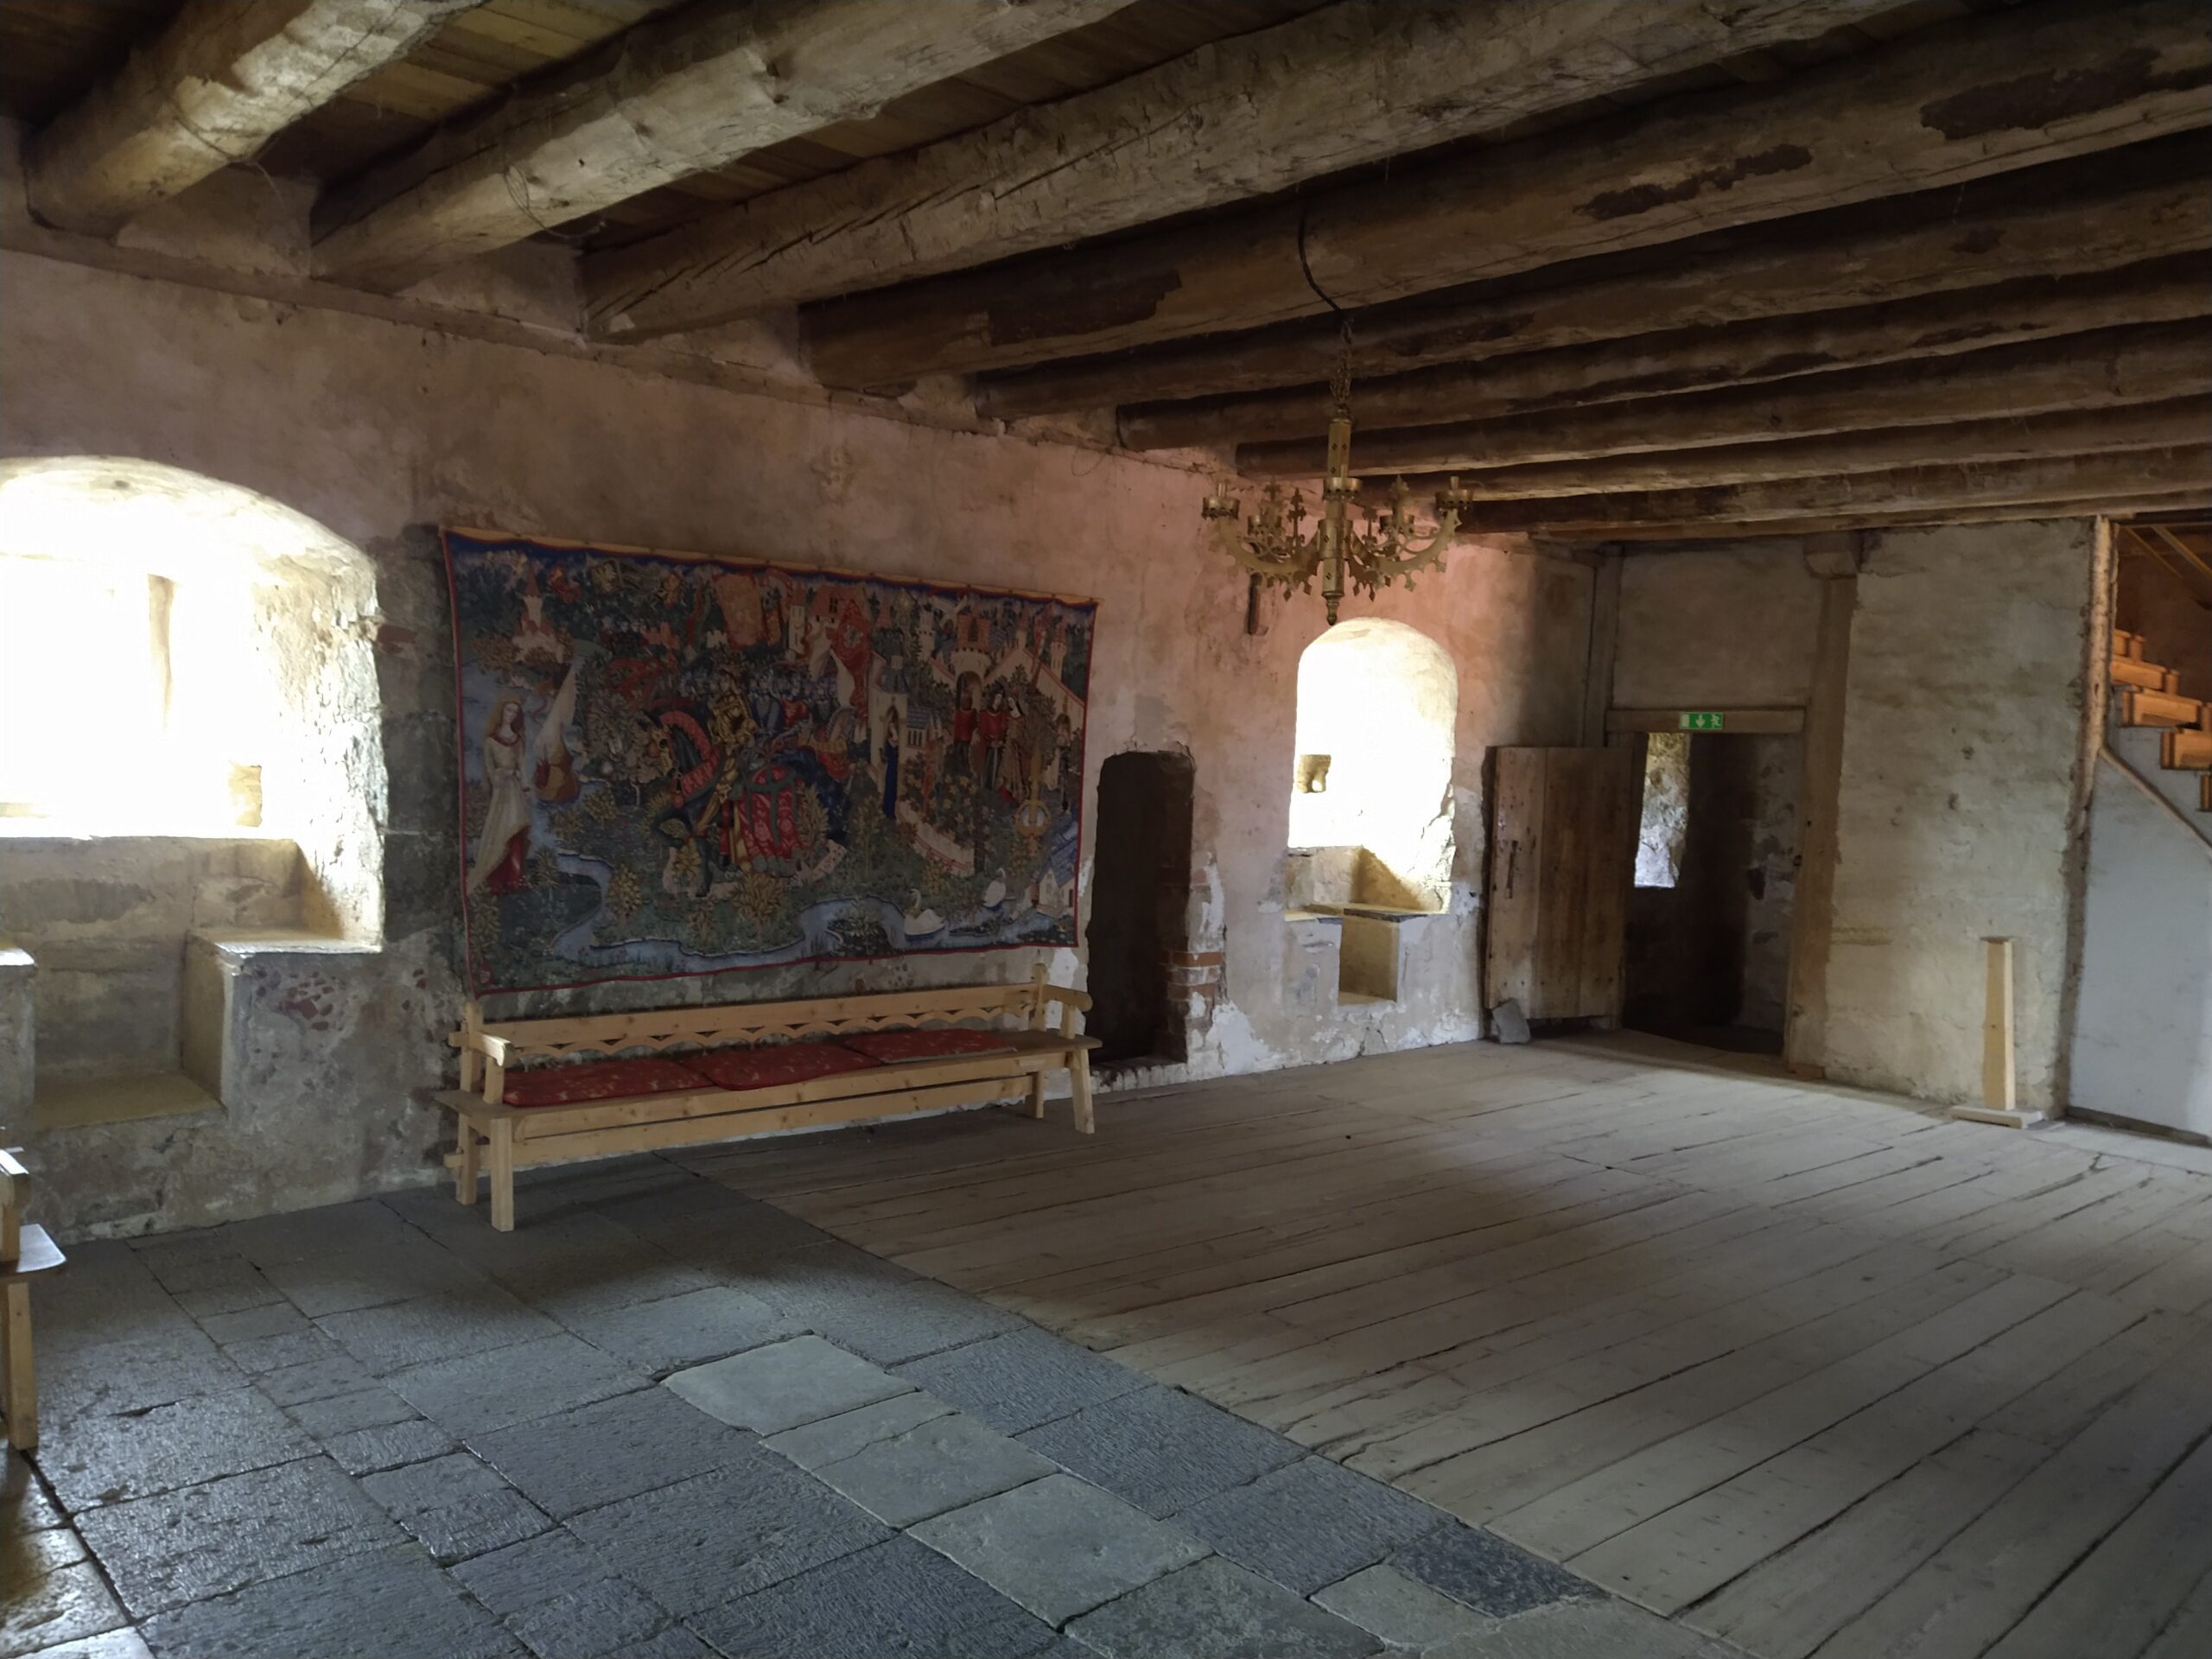 Here you can see part of the great hall with a tapestry on the wall and a bench underneath. Wooden beams can be seen in the ceiling.